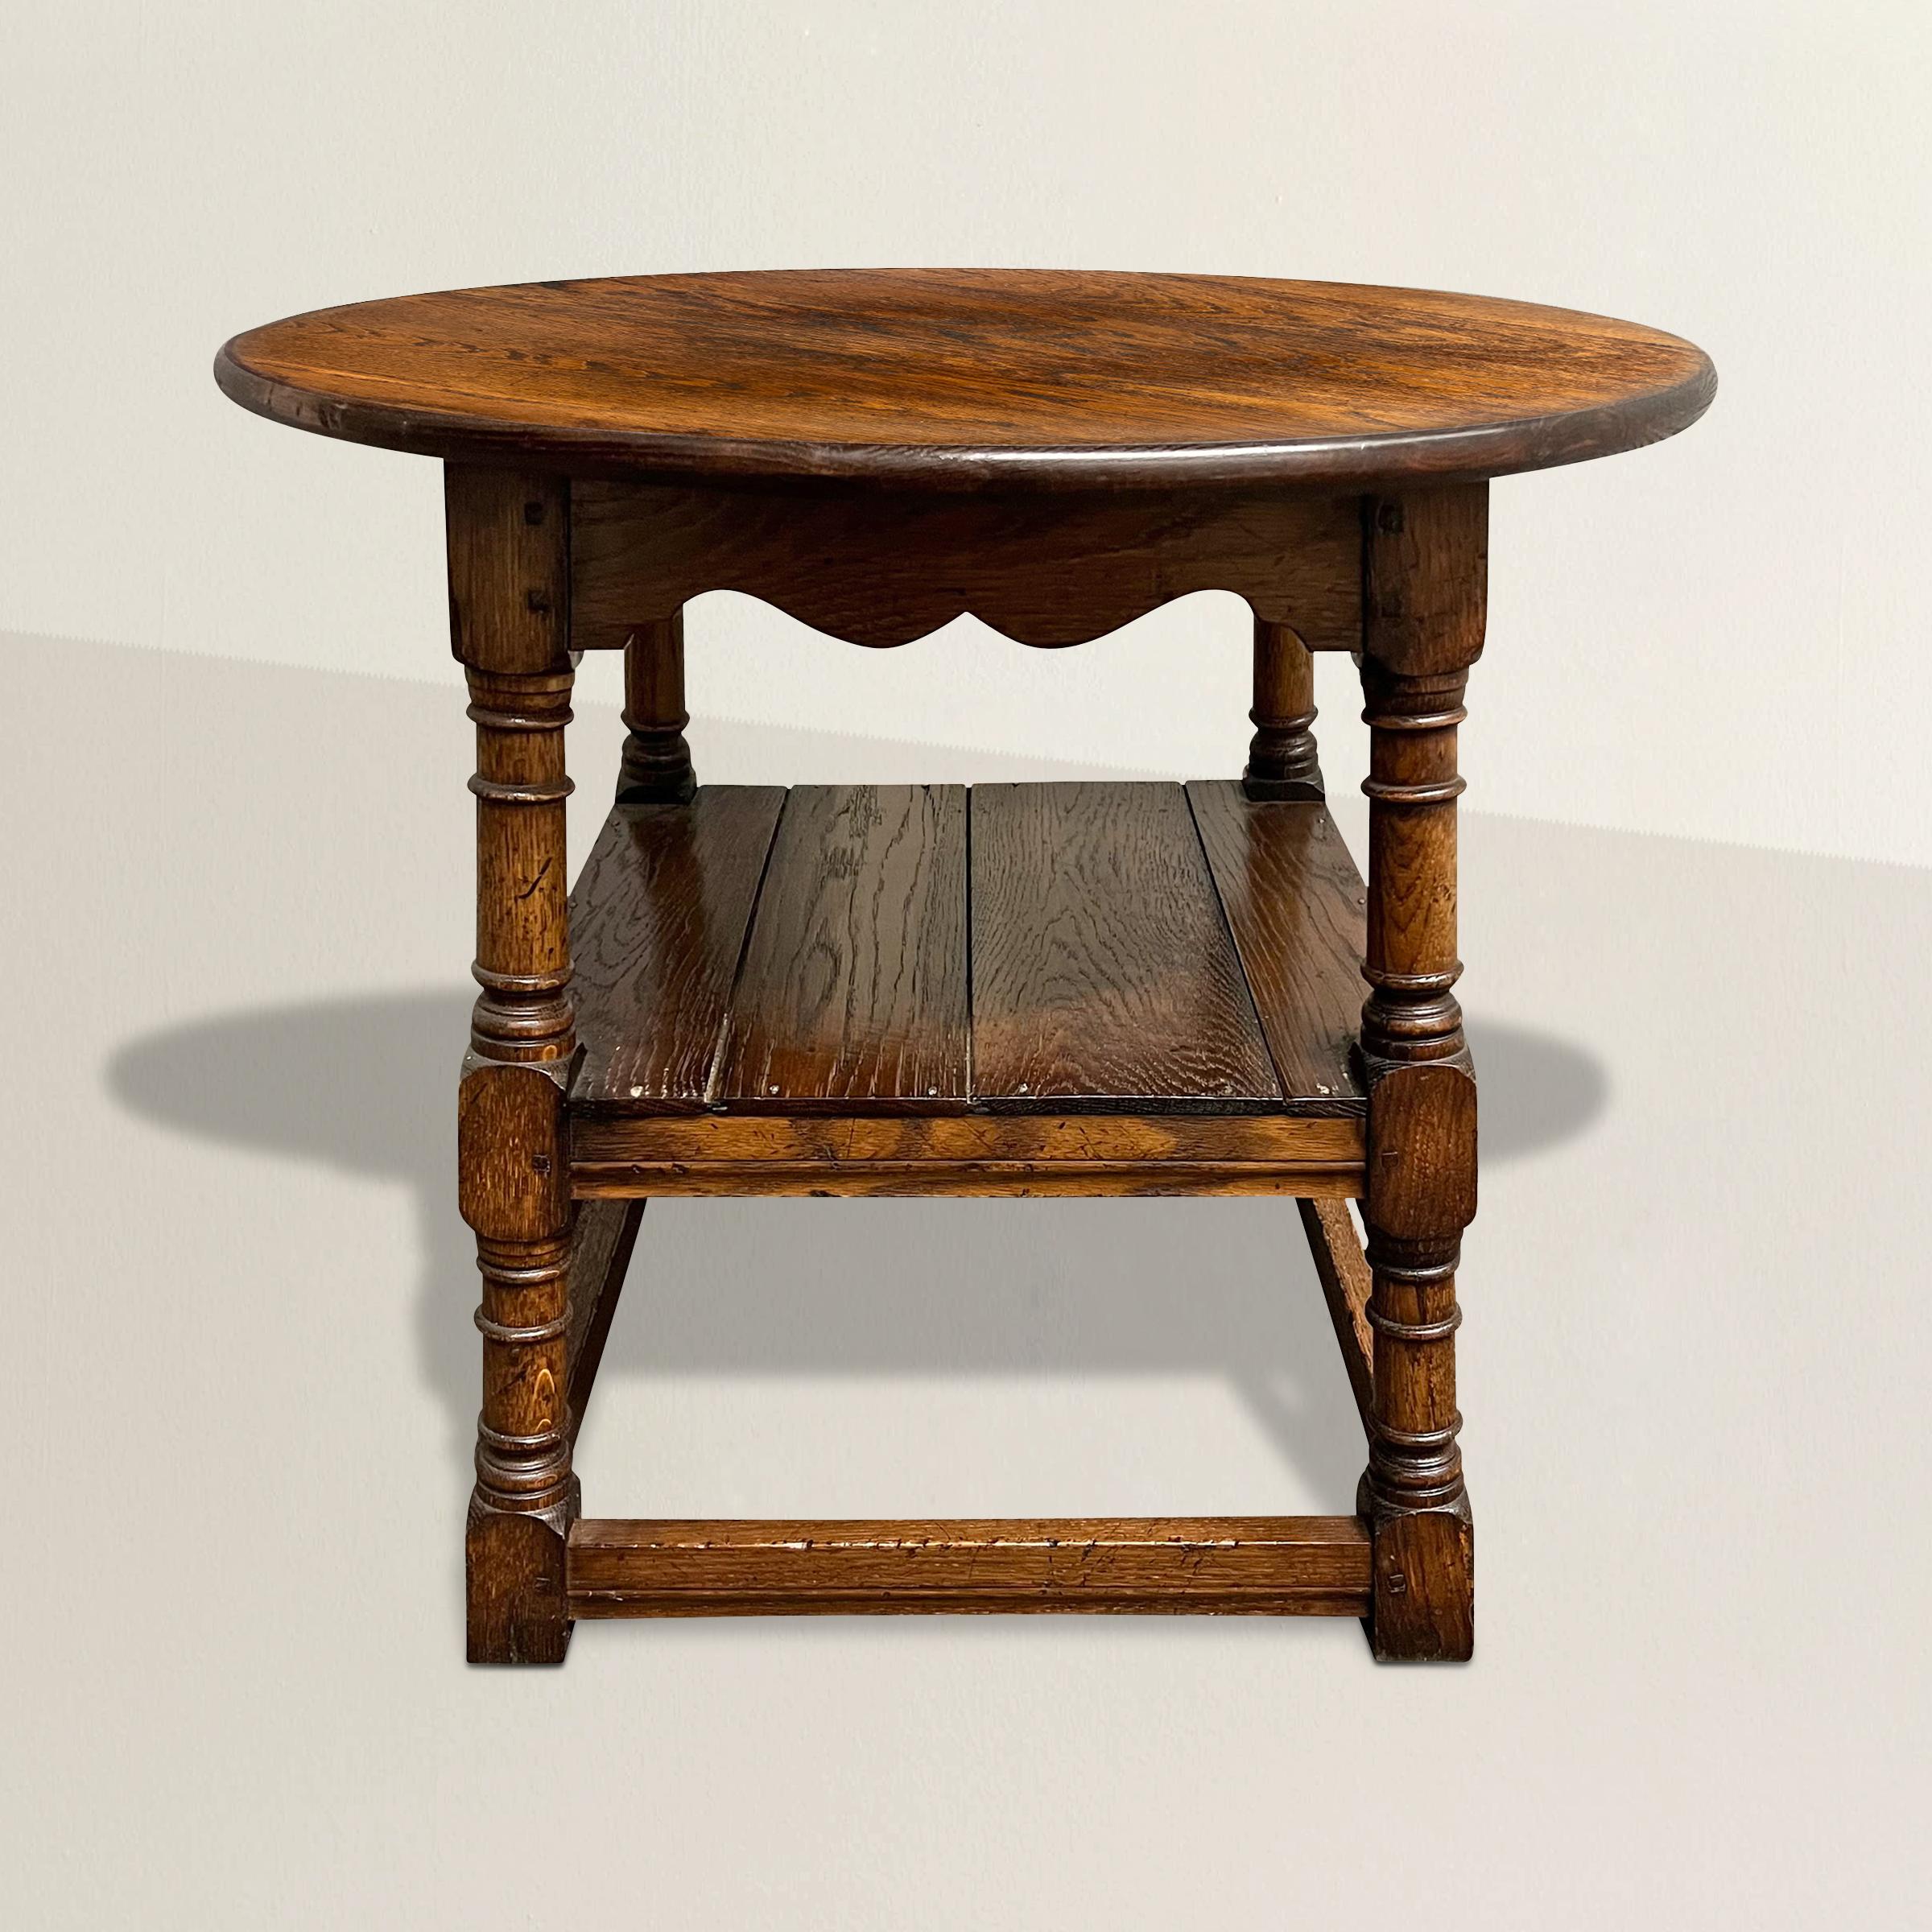 Step into the charm of the English countryside with this delightful 20th century English oak pub table, a versatile gem that combines style and functionality. Crafted with the timeless appeal of oak, this table features elegantly turned legs, a